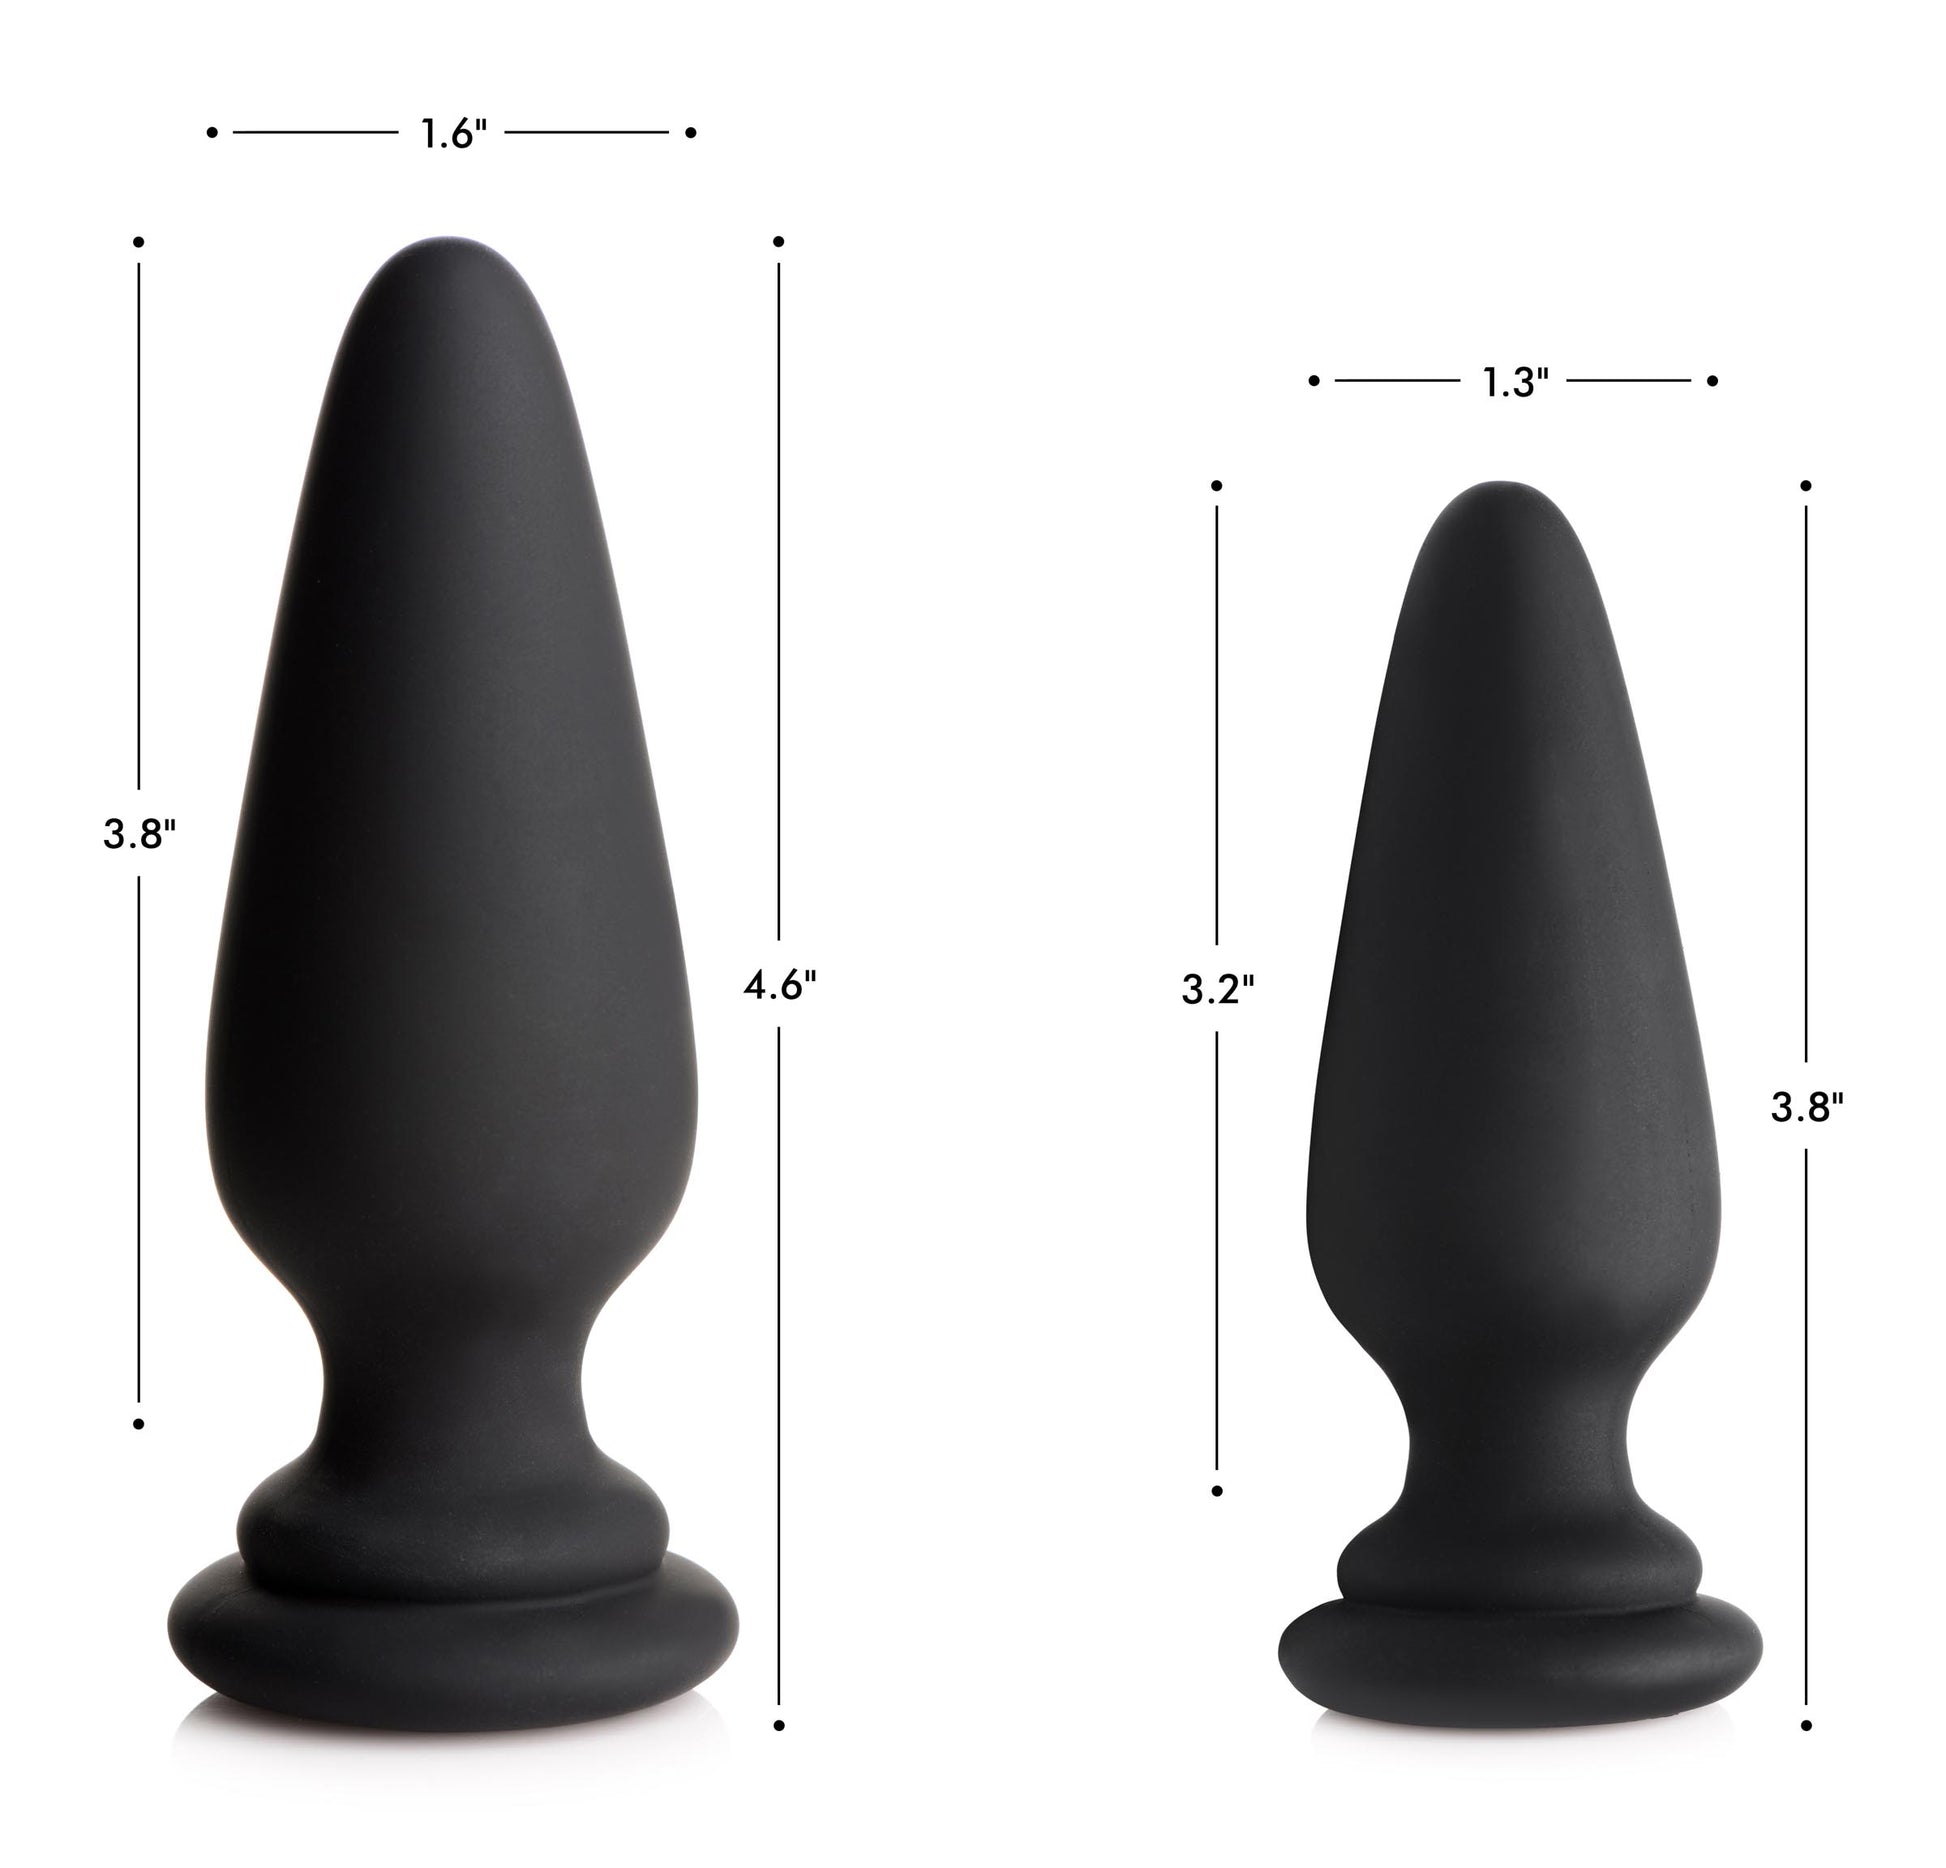 Small Anal Plug with Interchangeable Bunny Tail - Black - UABDSM